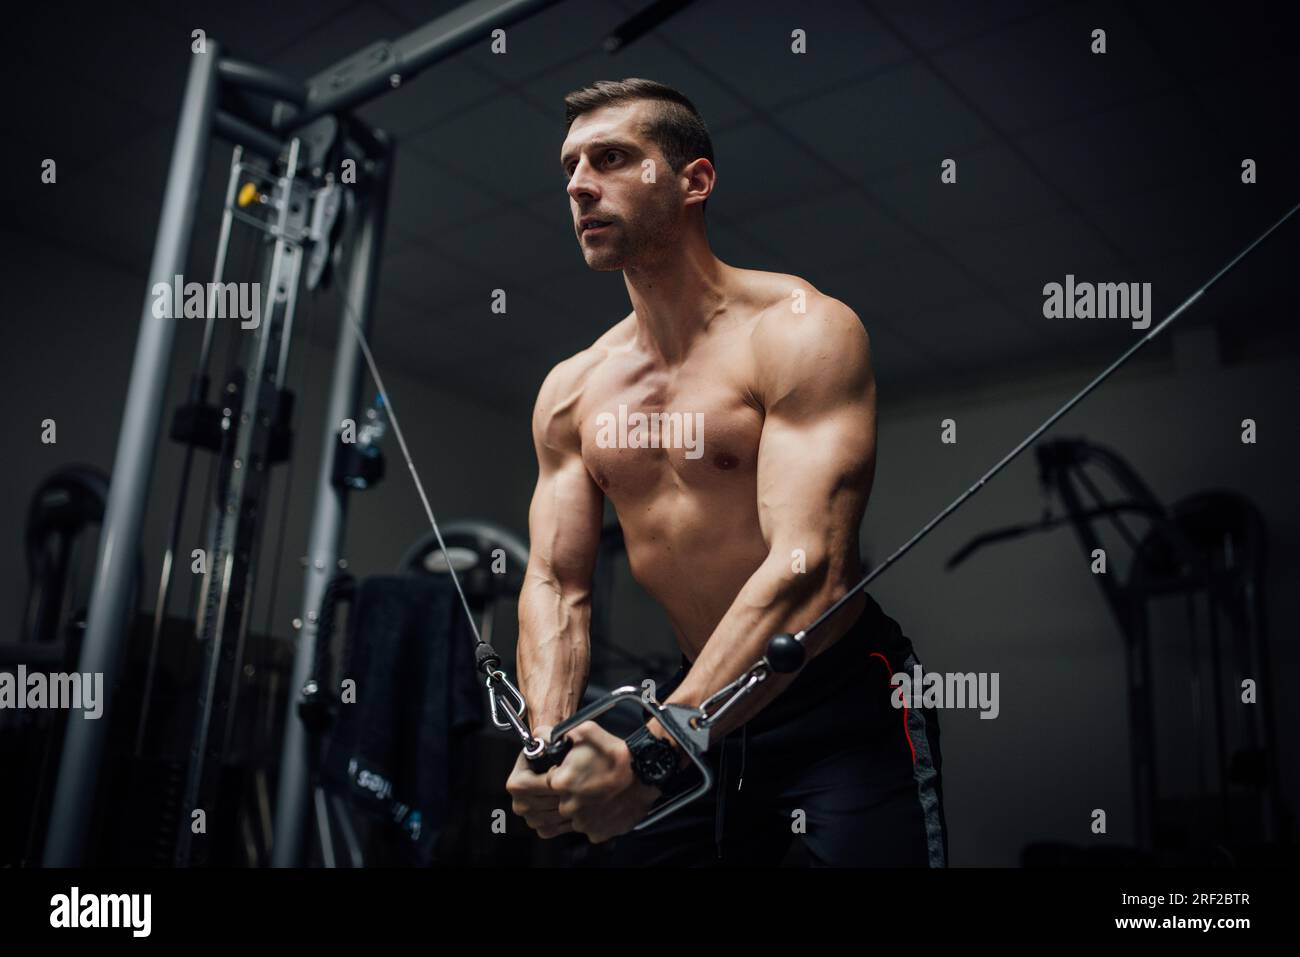 Muscular Body Builder Working Out At The Gym Doing Chest